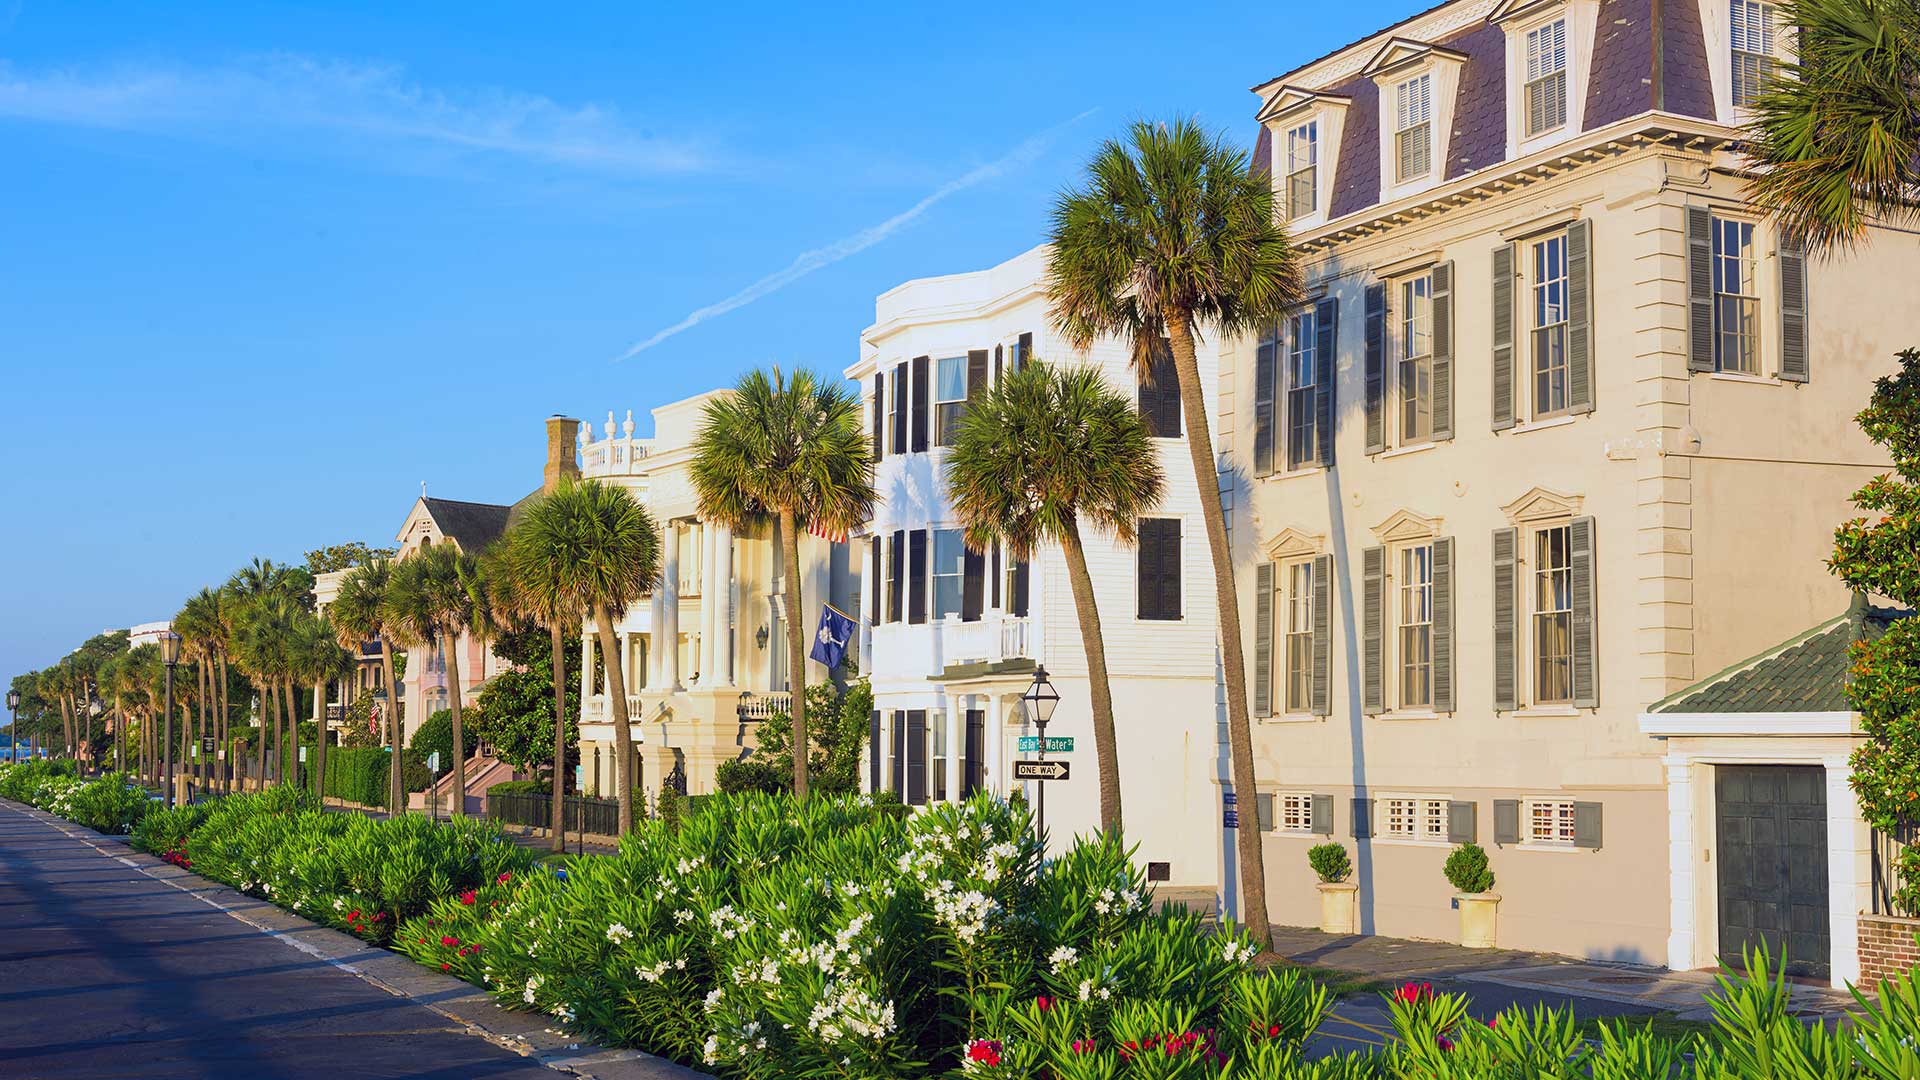 An Insider's Guide to a Stylish Weekend in Charleston